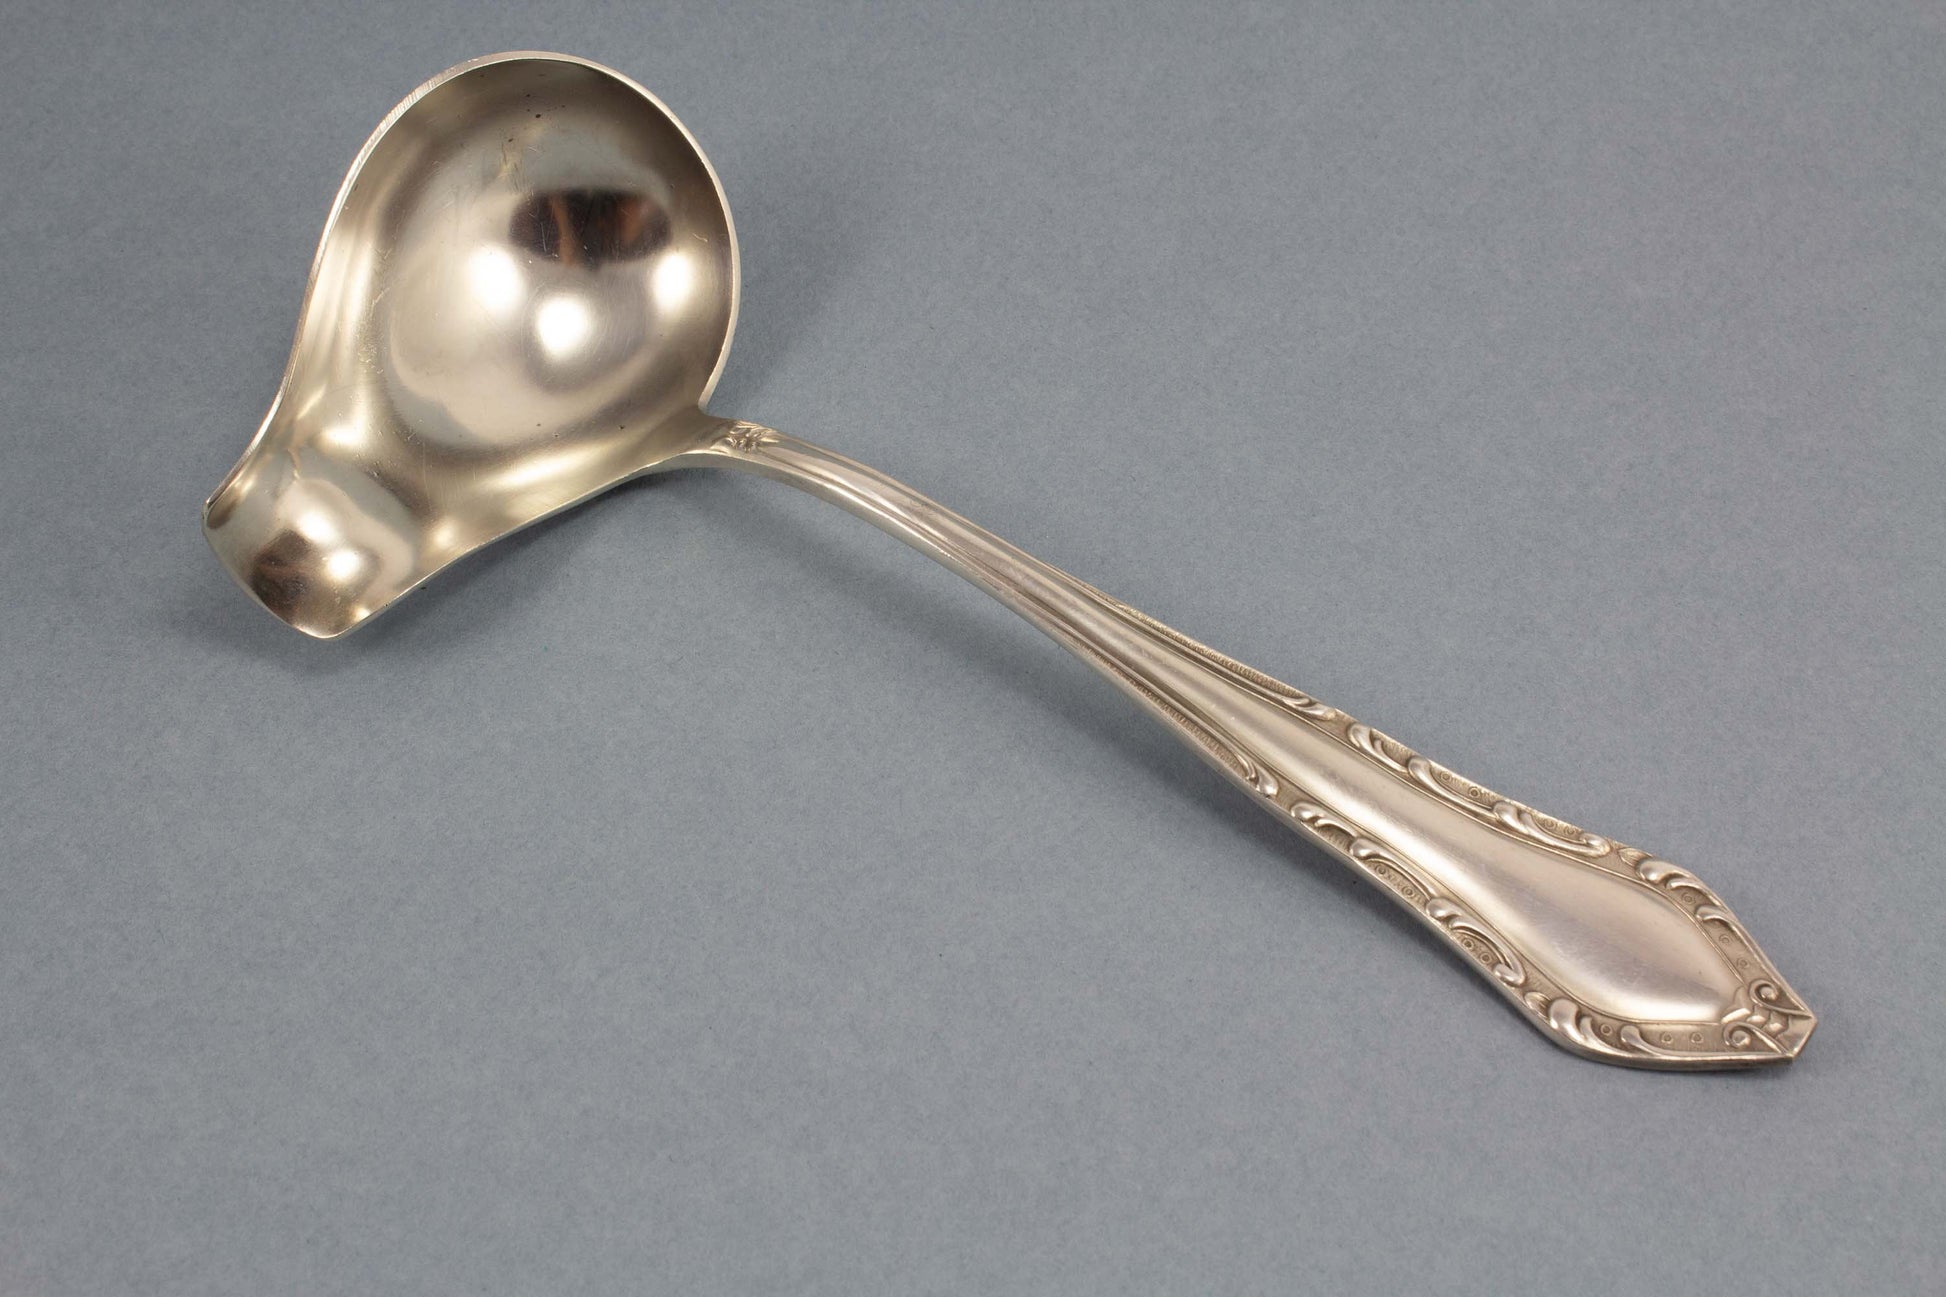 Sauce ladle, silver-plated, pattern, ladle, silver-plated ladle